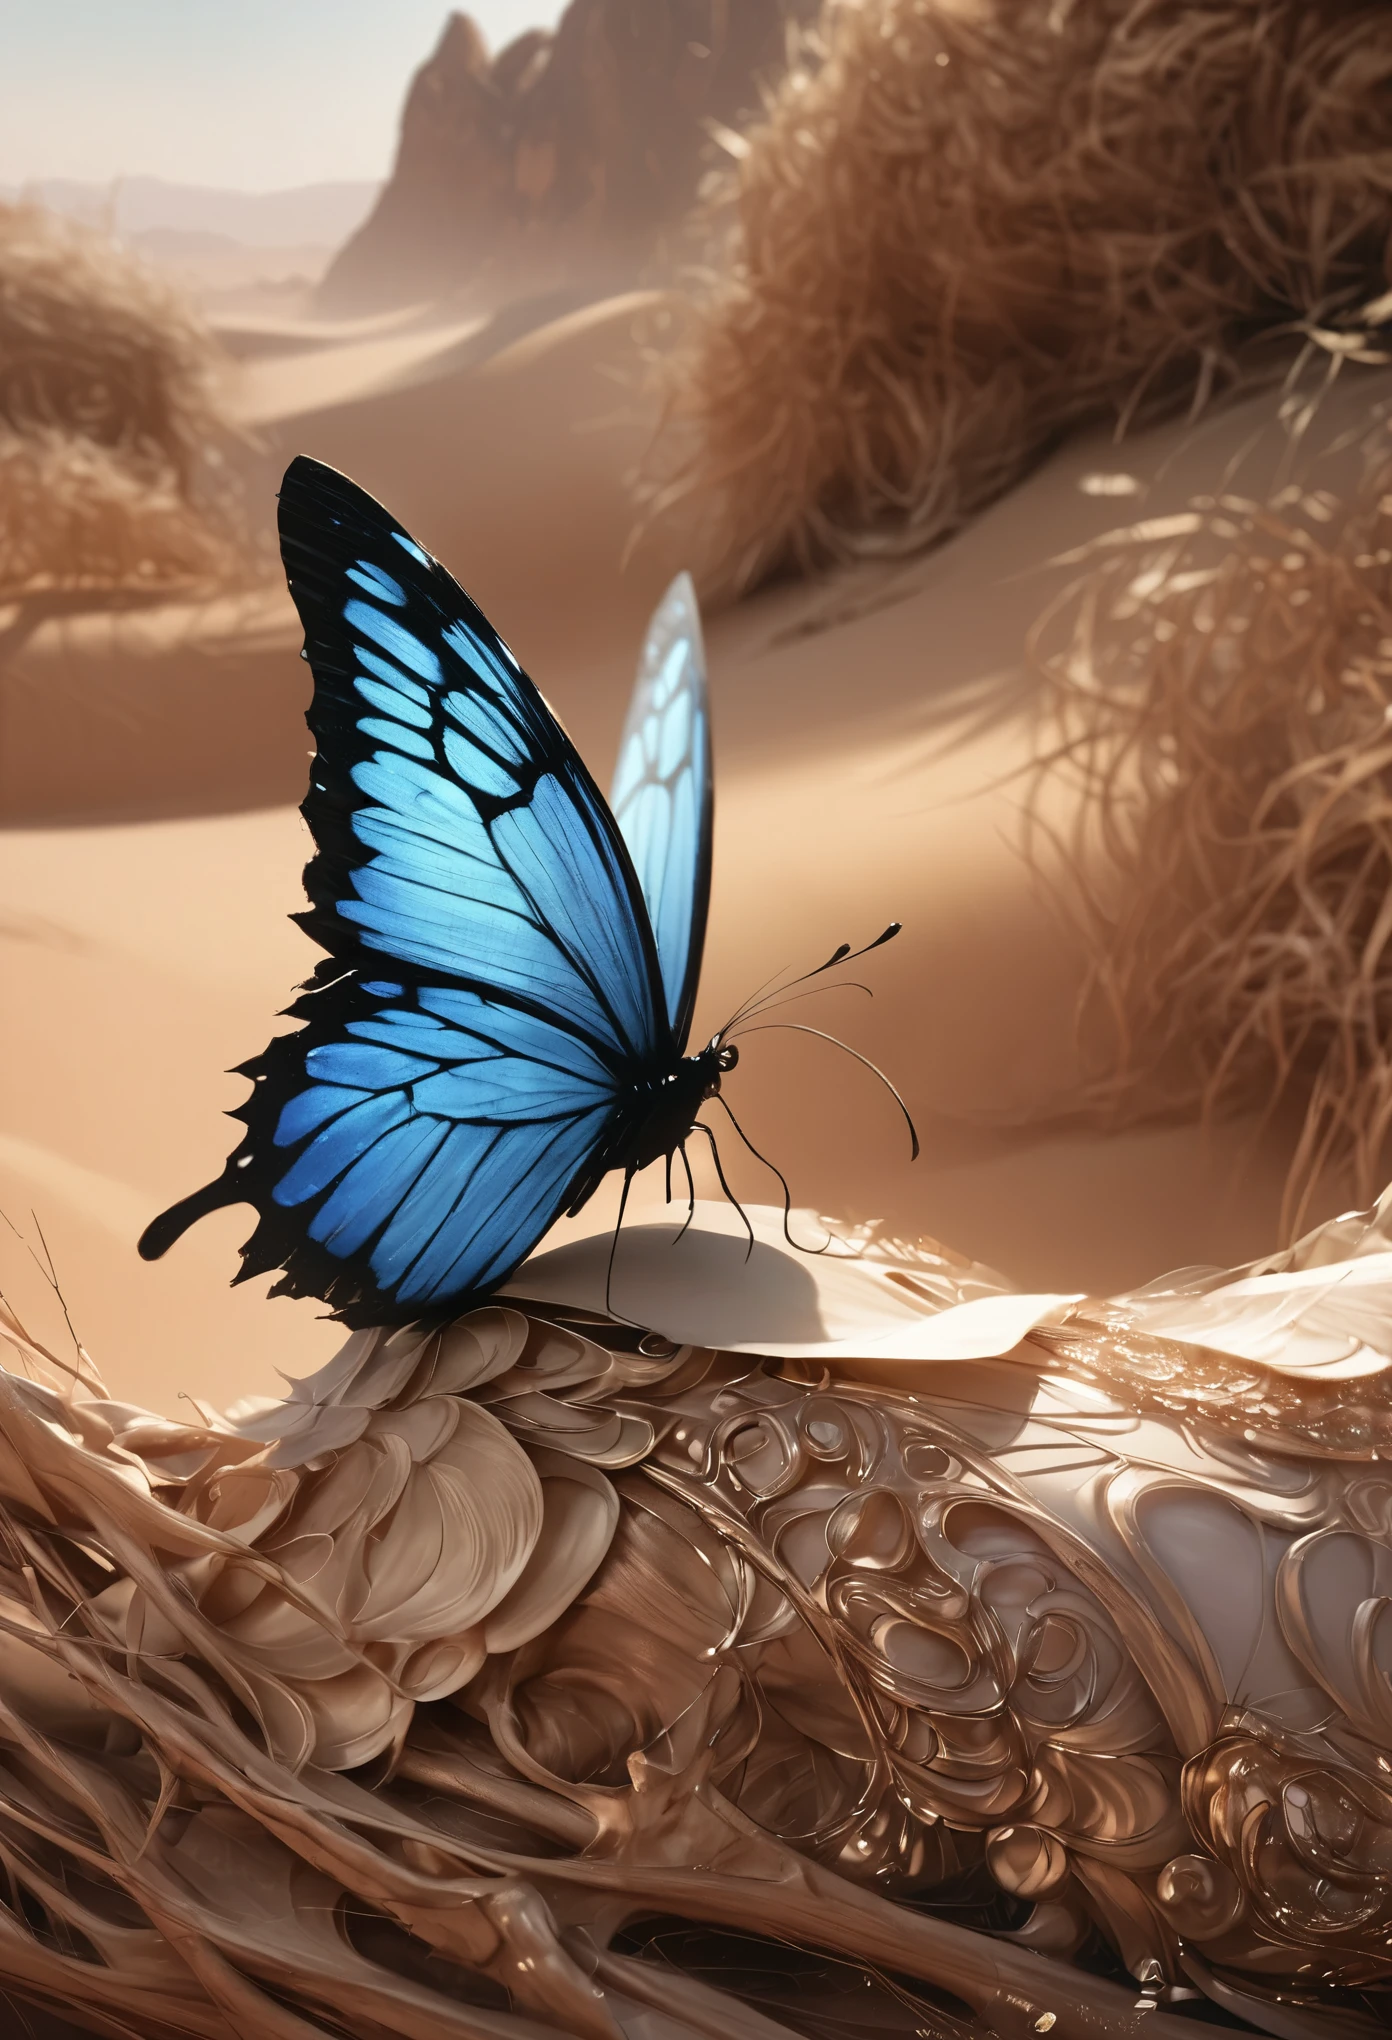 animetoreal, (best quality,4k,8k,highres,masterpiece:1.2),ultra-detailed,(realistic,photorealistic,photo-realistic:1.37),portrait,nature,close-up,macro,blue butterfly,butterfly perched,on a withered branch,in the desert,sharp focus,detailed wings,delicate pattern,dry and barren desert,tranquil scene,subtle sunlight filtering through,tiny grains of sand,contrasting colors,harmony of blues and browns,gentle breeze causing the butterfly's wings to flutter,elegant and graceful,peaceful and serene atmosphere,majestic and fragile beauty,contrast between fragility and harsh surroundings